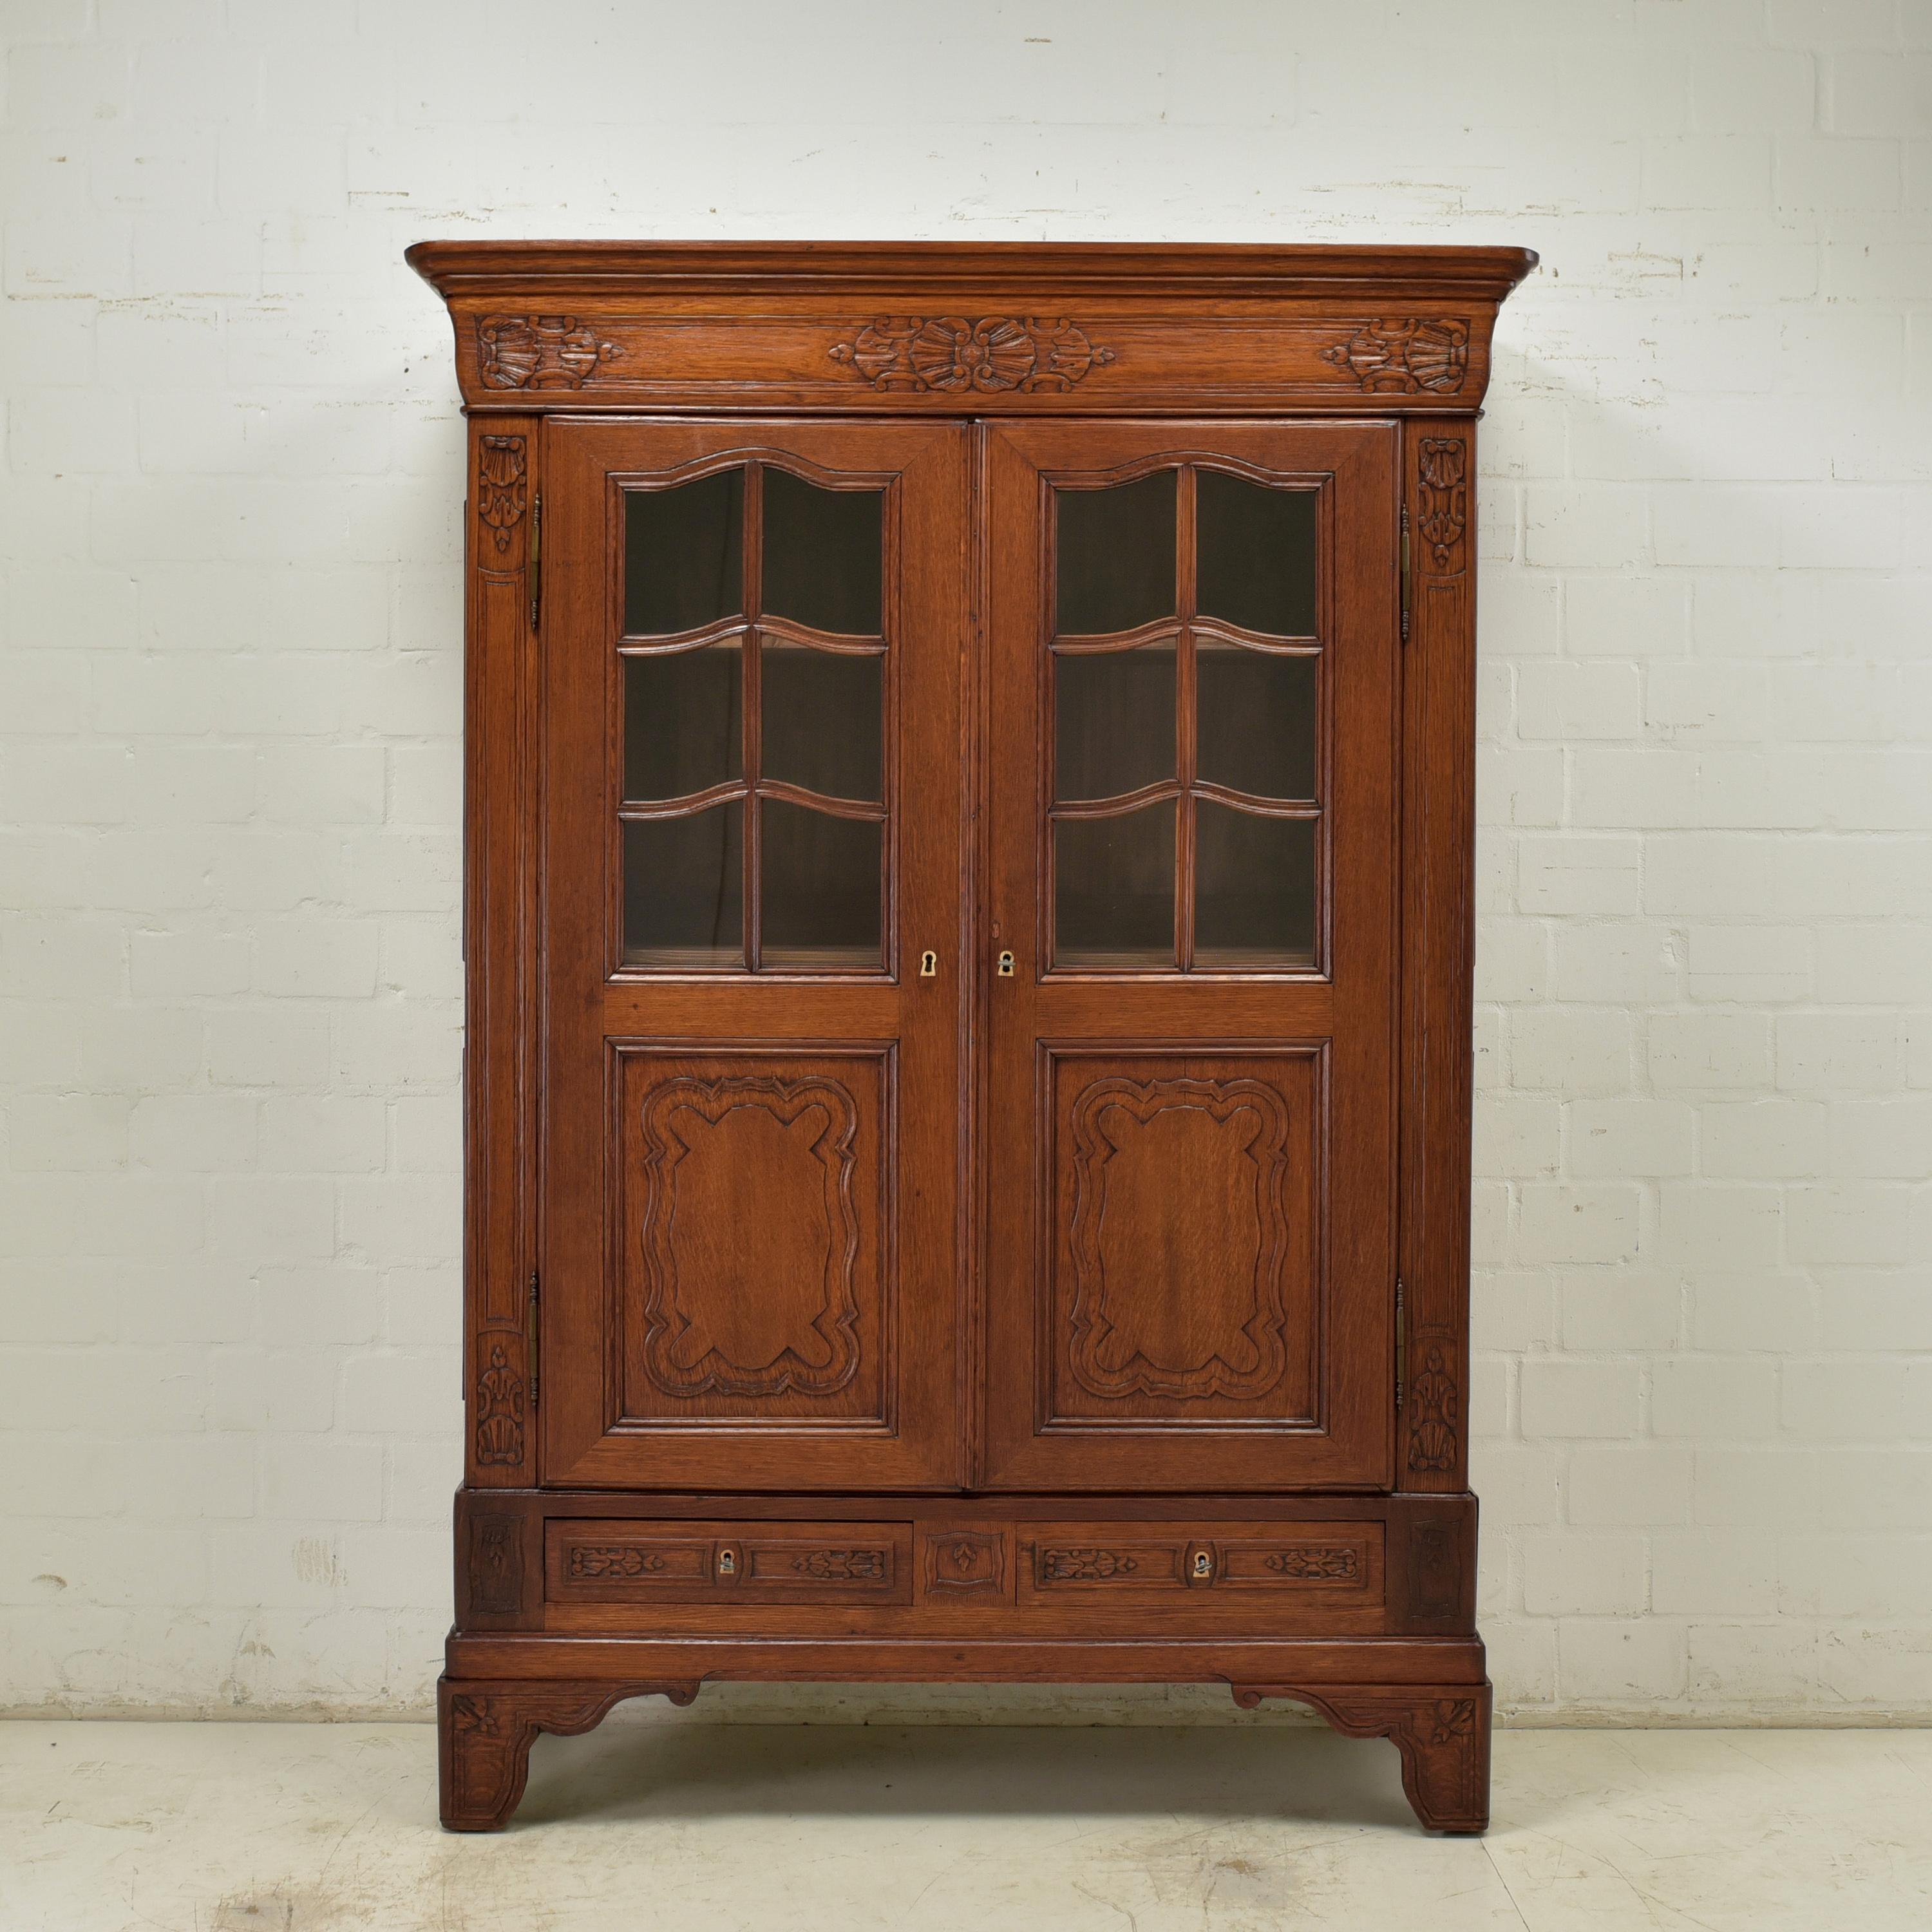 Display cabinet restored neo-baroque late Biedermeier around 1860 oak

Features:
Solid oak body, solid softwood inside
Two-door model with three shelves and two drawers
High quality
Beautiful carved decor
Beautiful patina
The cabinet can be